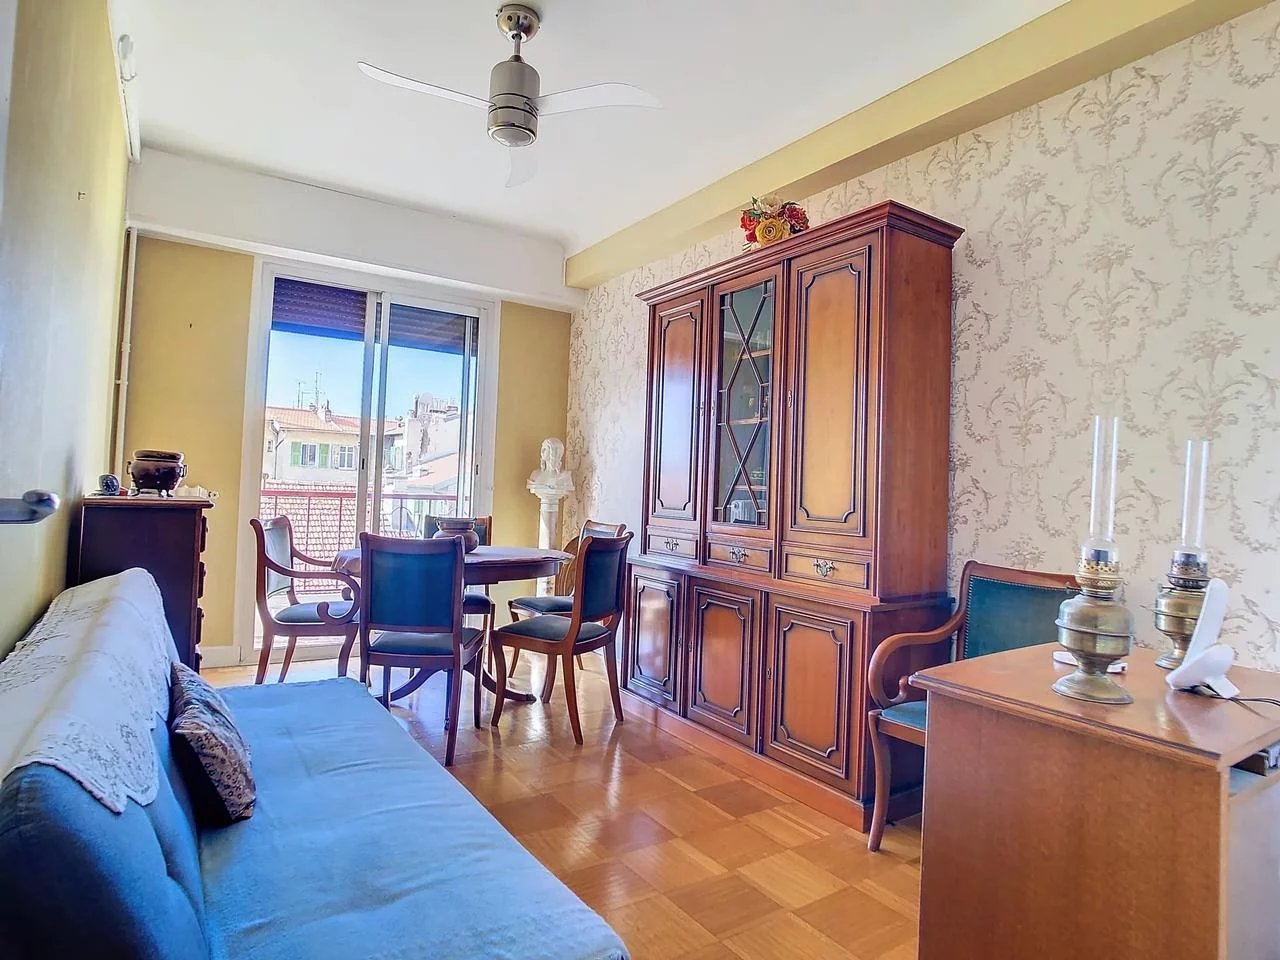 Appartement  2 Rooms 48.65m2  for sale   205 000 €